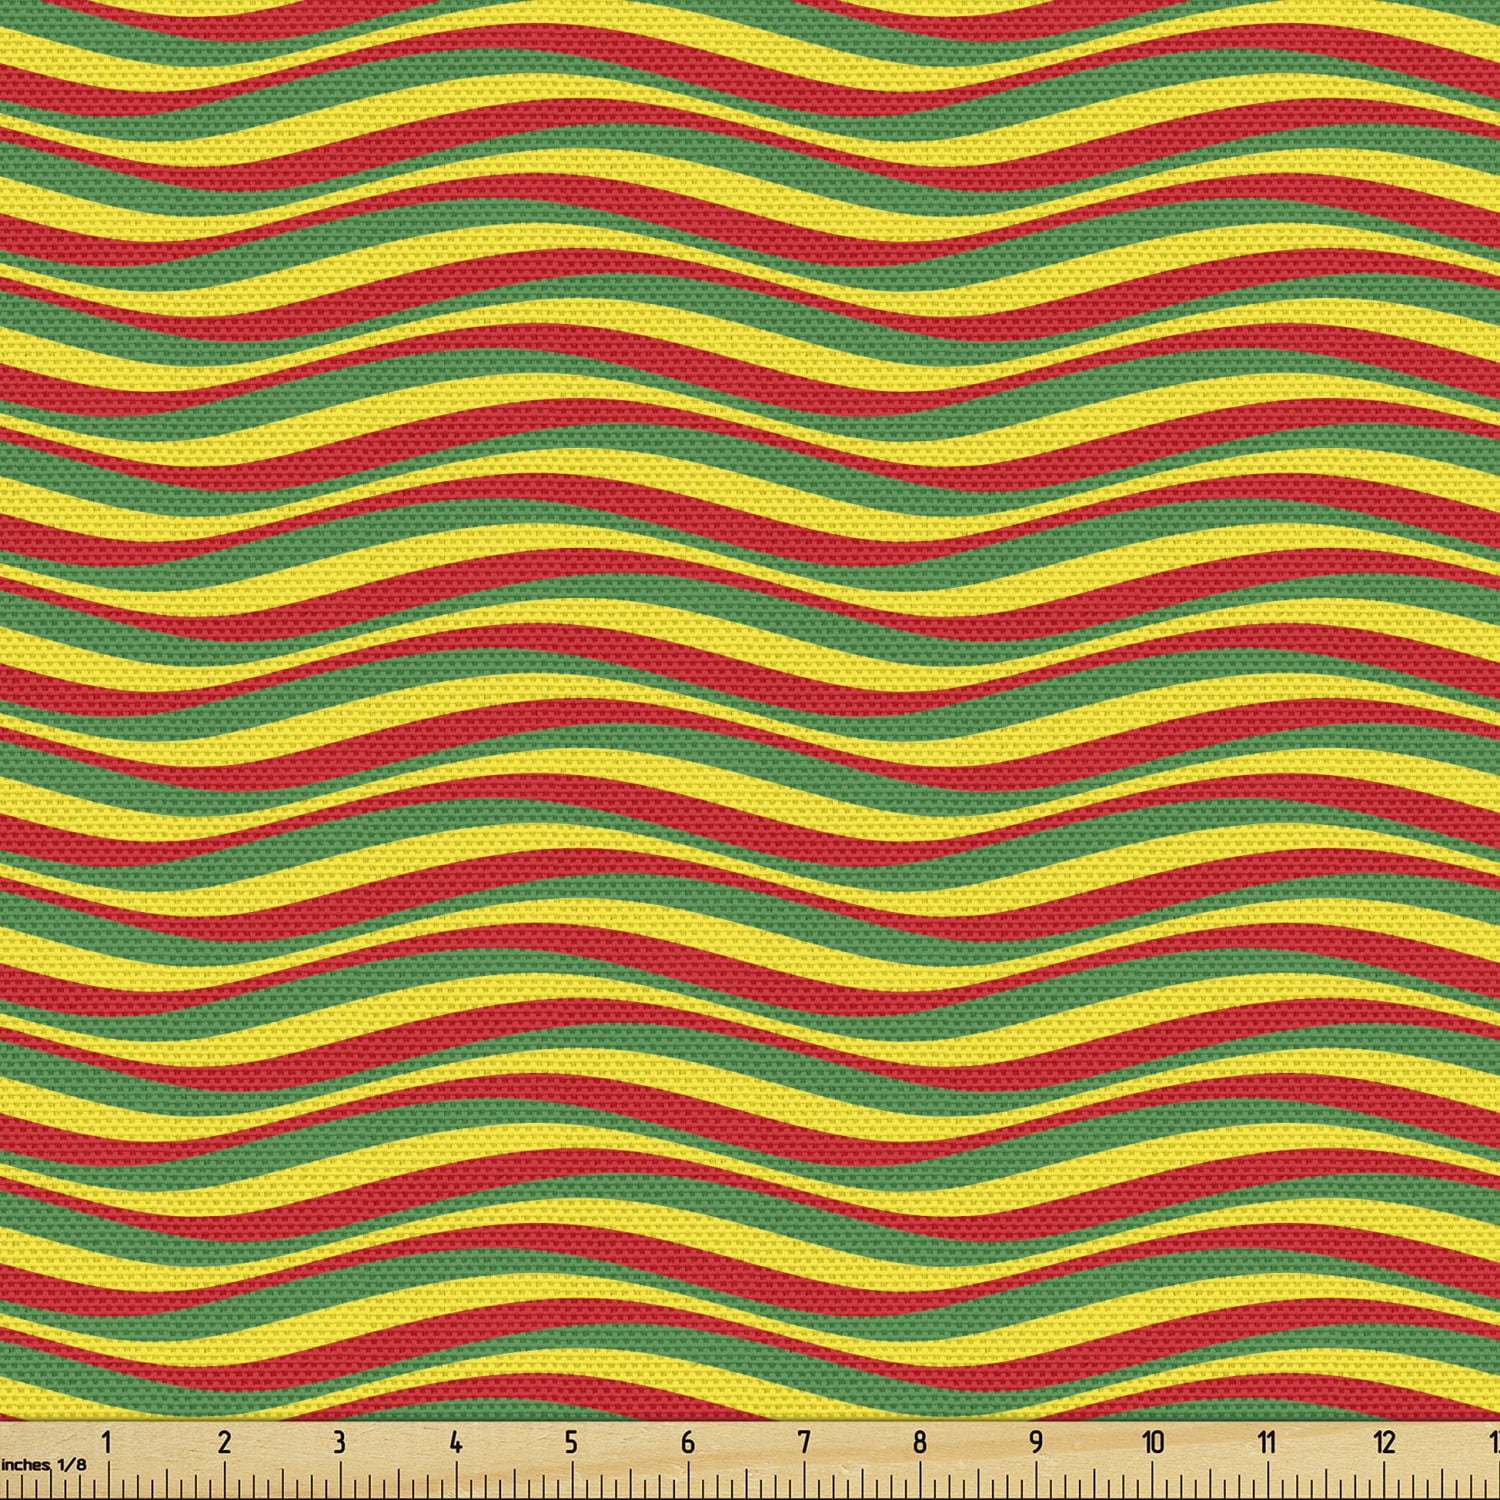 Rasta Sofa Upholstery Fabric the Yard, Vivid Colors Ethiopian Flag Colors in Wavy Style Stripes Image, Decorative Fabric for DIY & Home Accents, 2 Yards, Marigold Green and Red by Ambesonne -